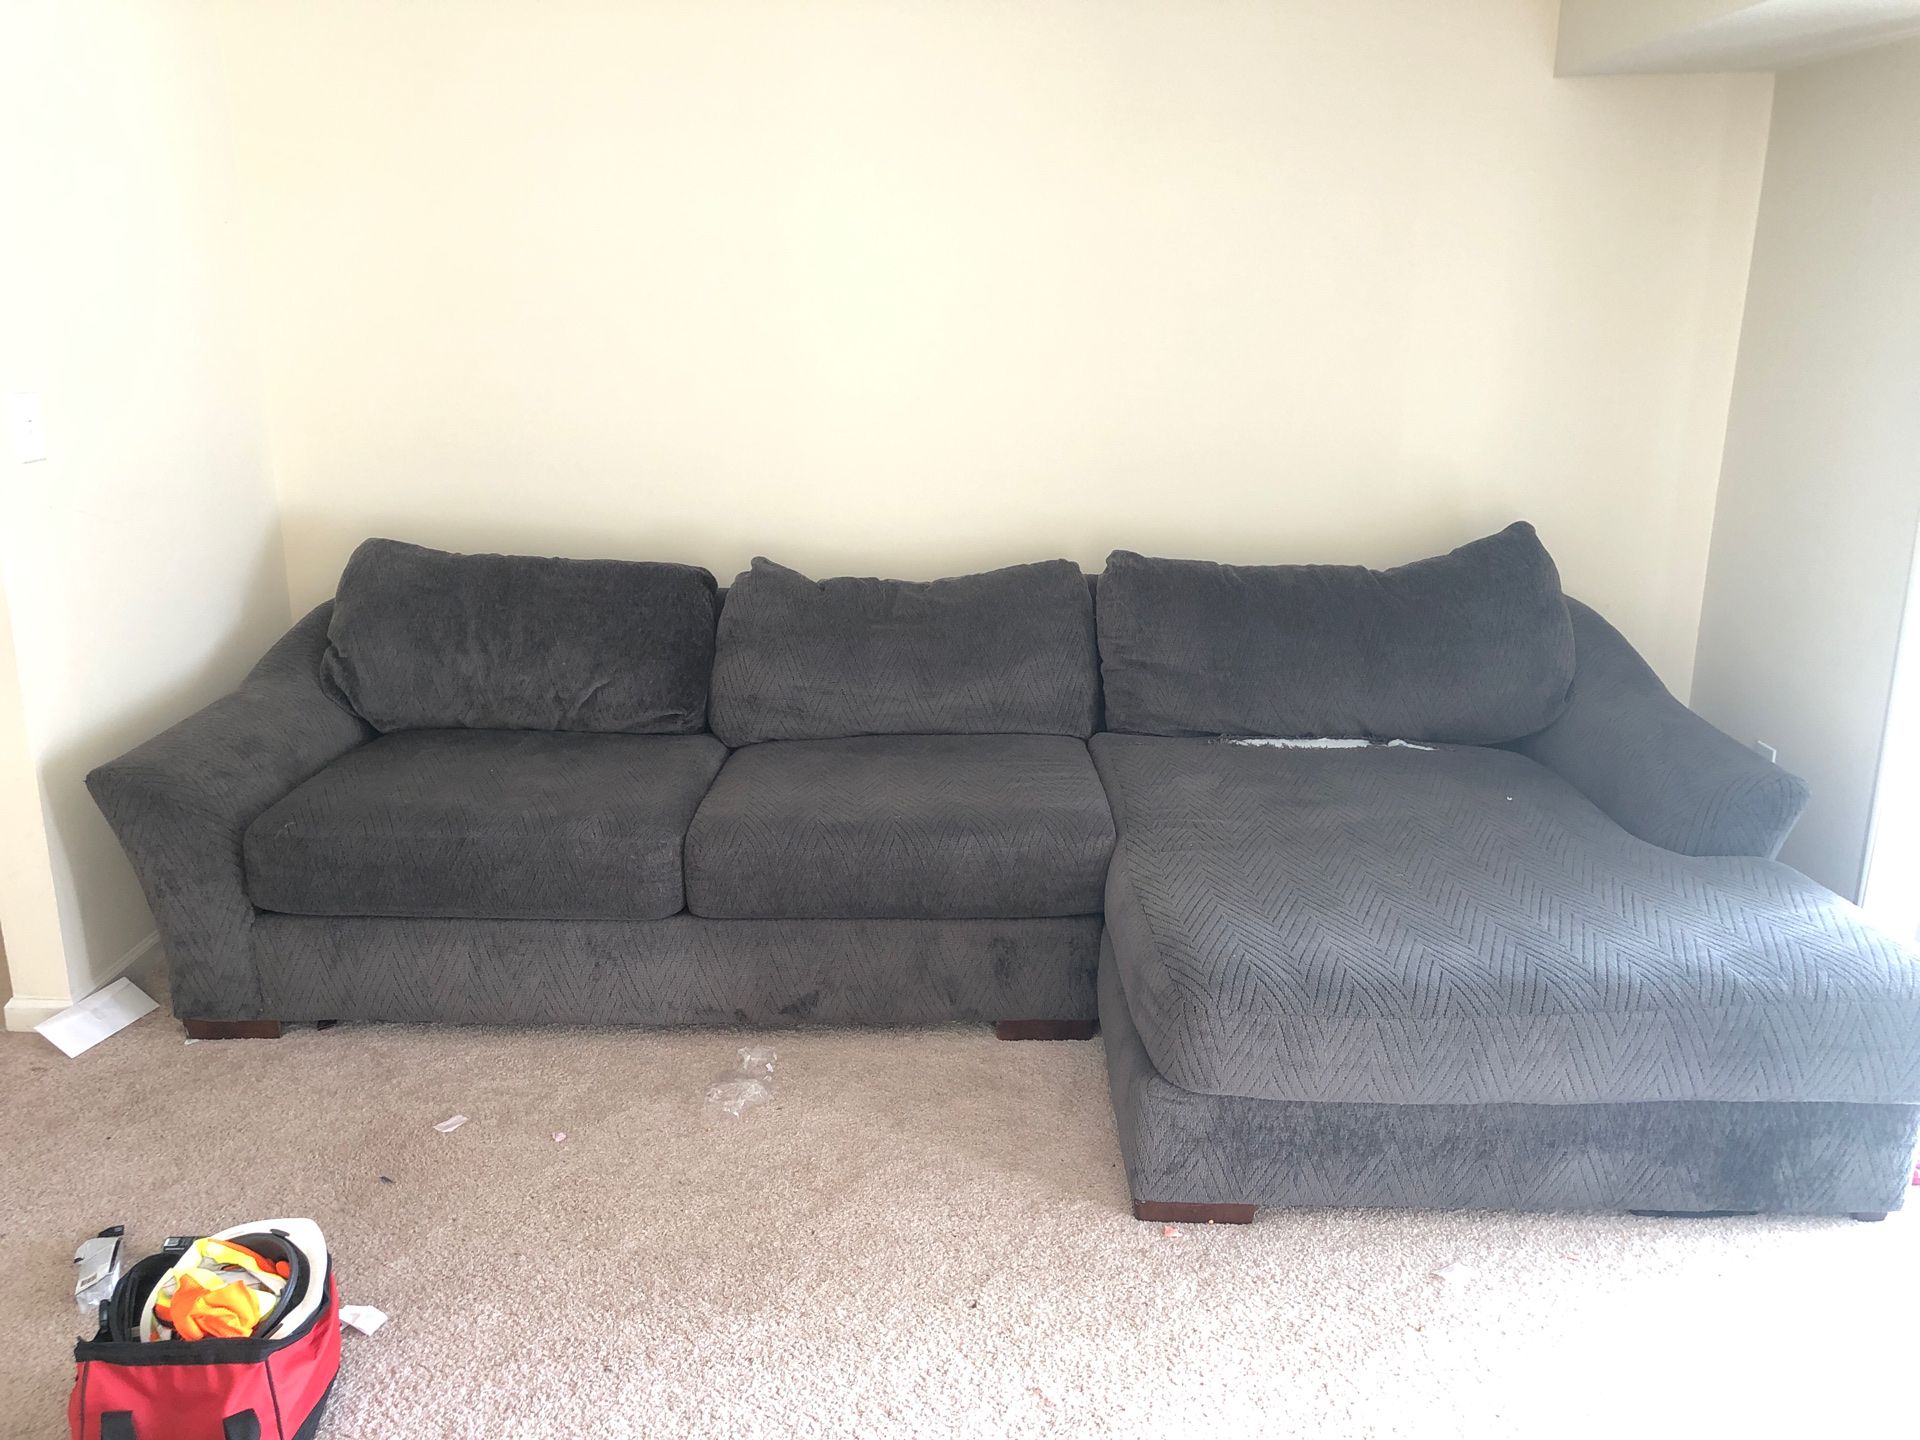 Sectional couch